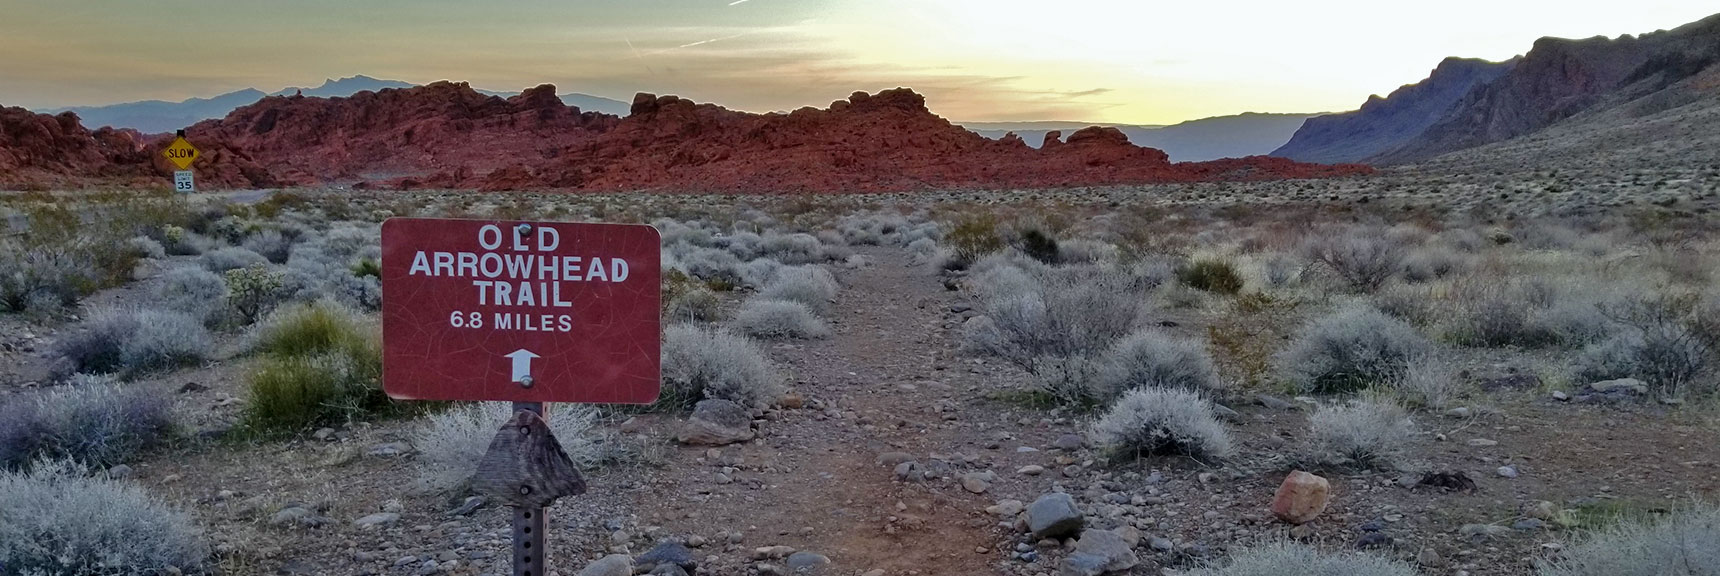 Western Entrance to Old Arrowhead Trail in Valley of Fire State Park, Nevada